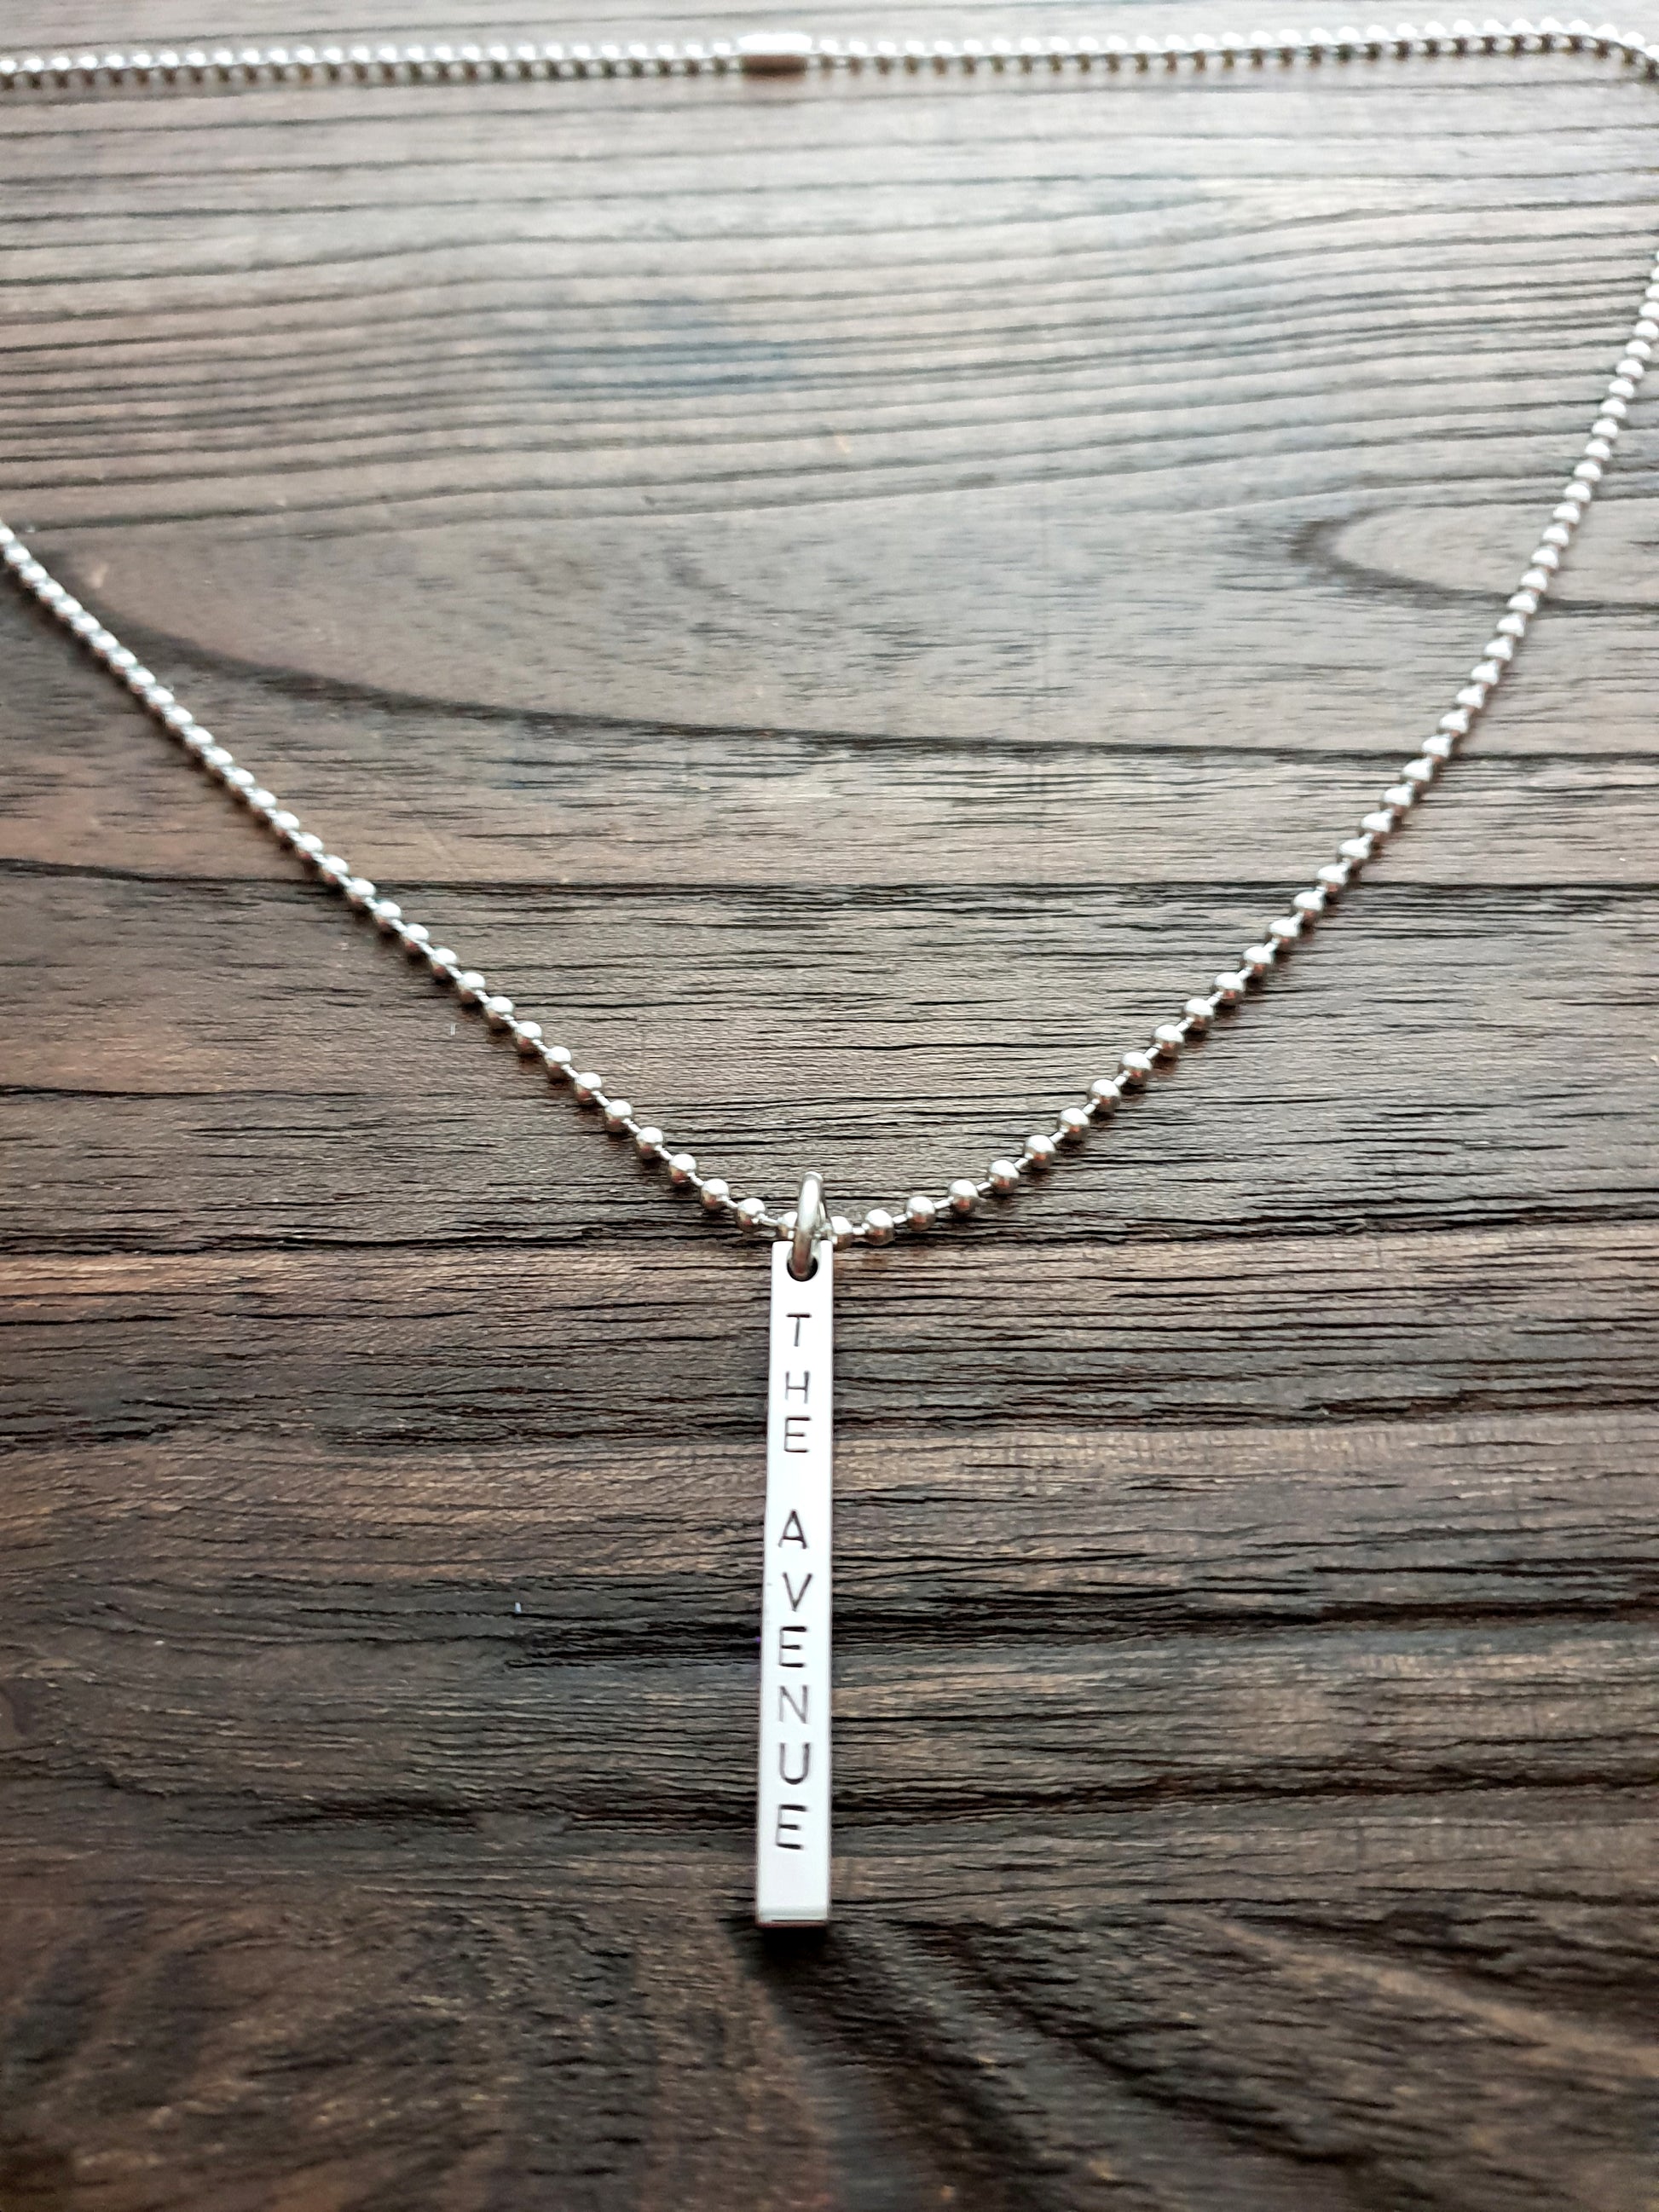 Personalised Name Stamped Necklace Bar Stainless Steel, 4 Sided Bar Pendant Necklace - Silver and Resin Designs